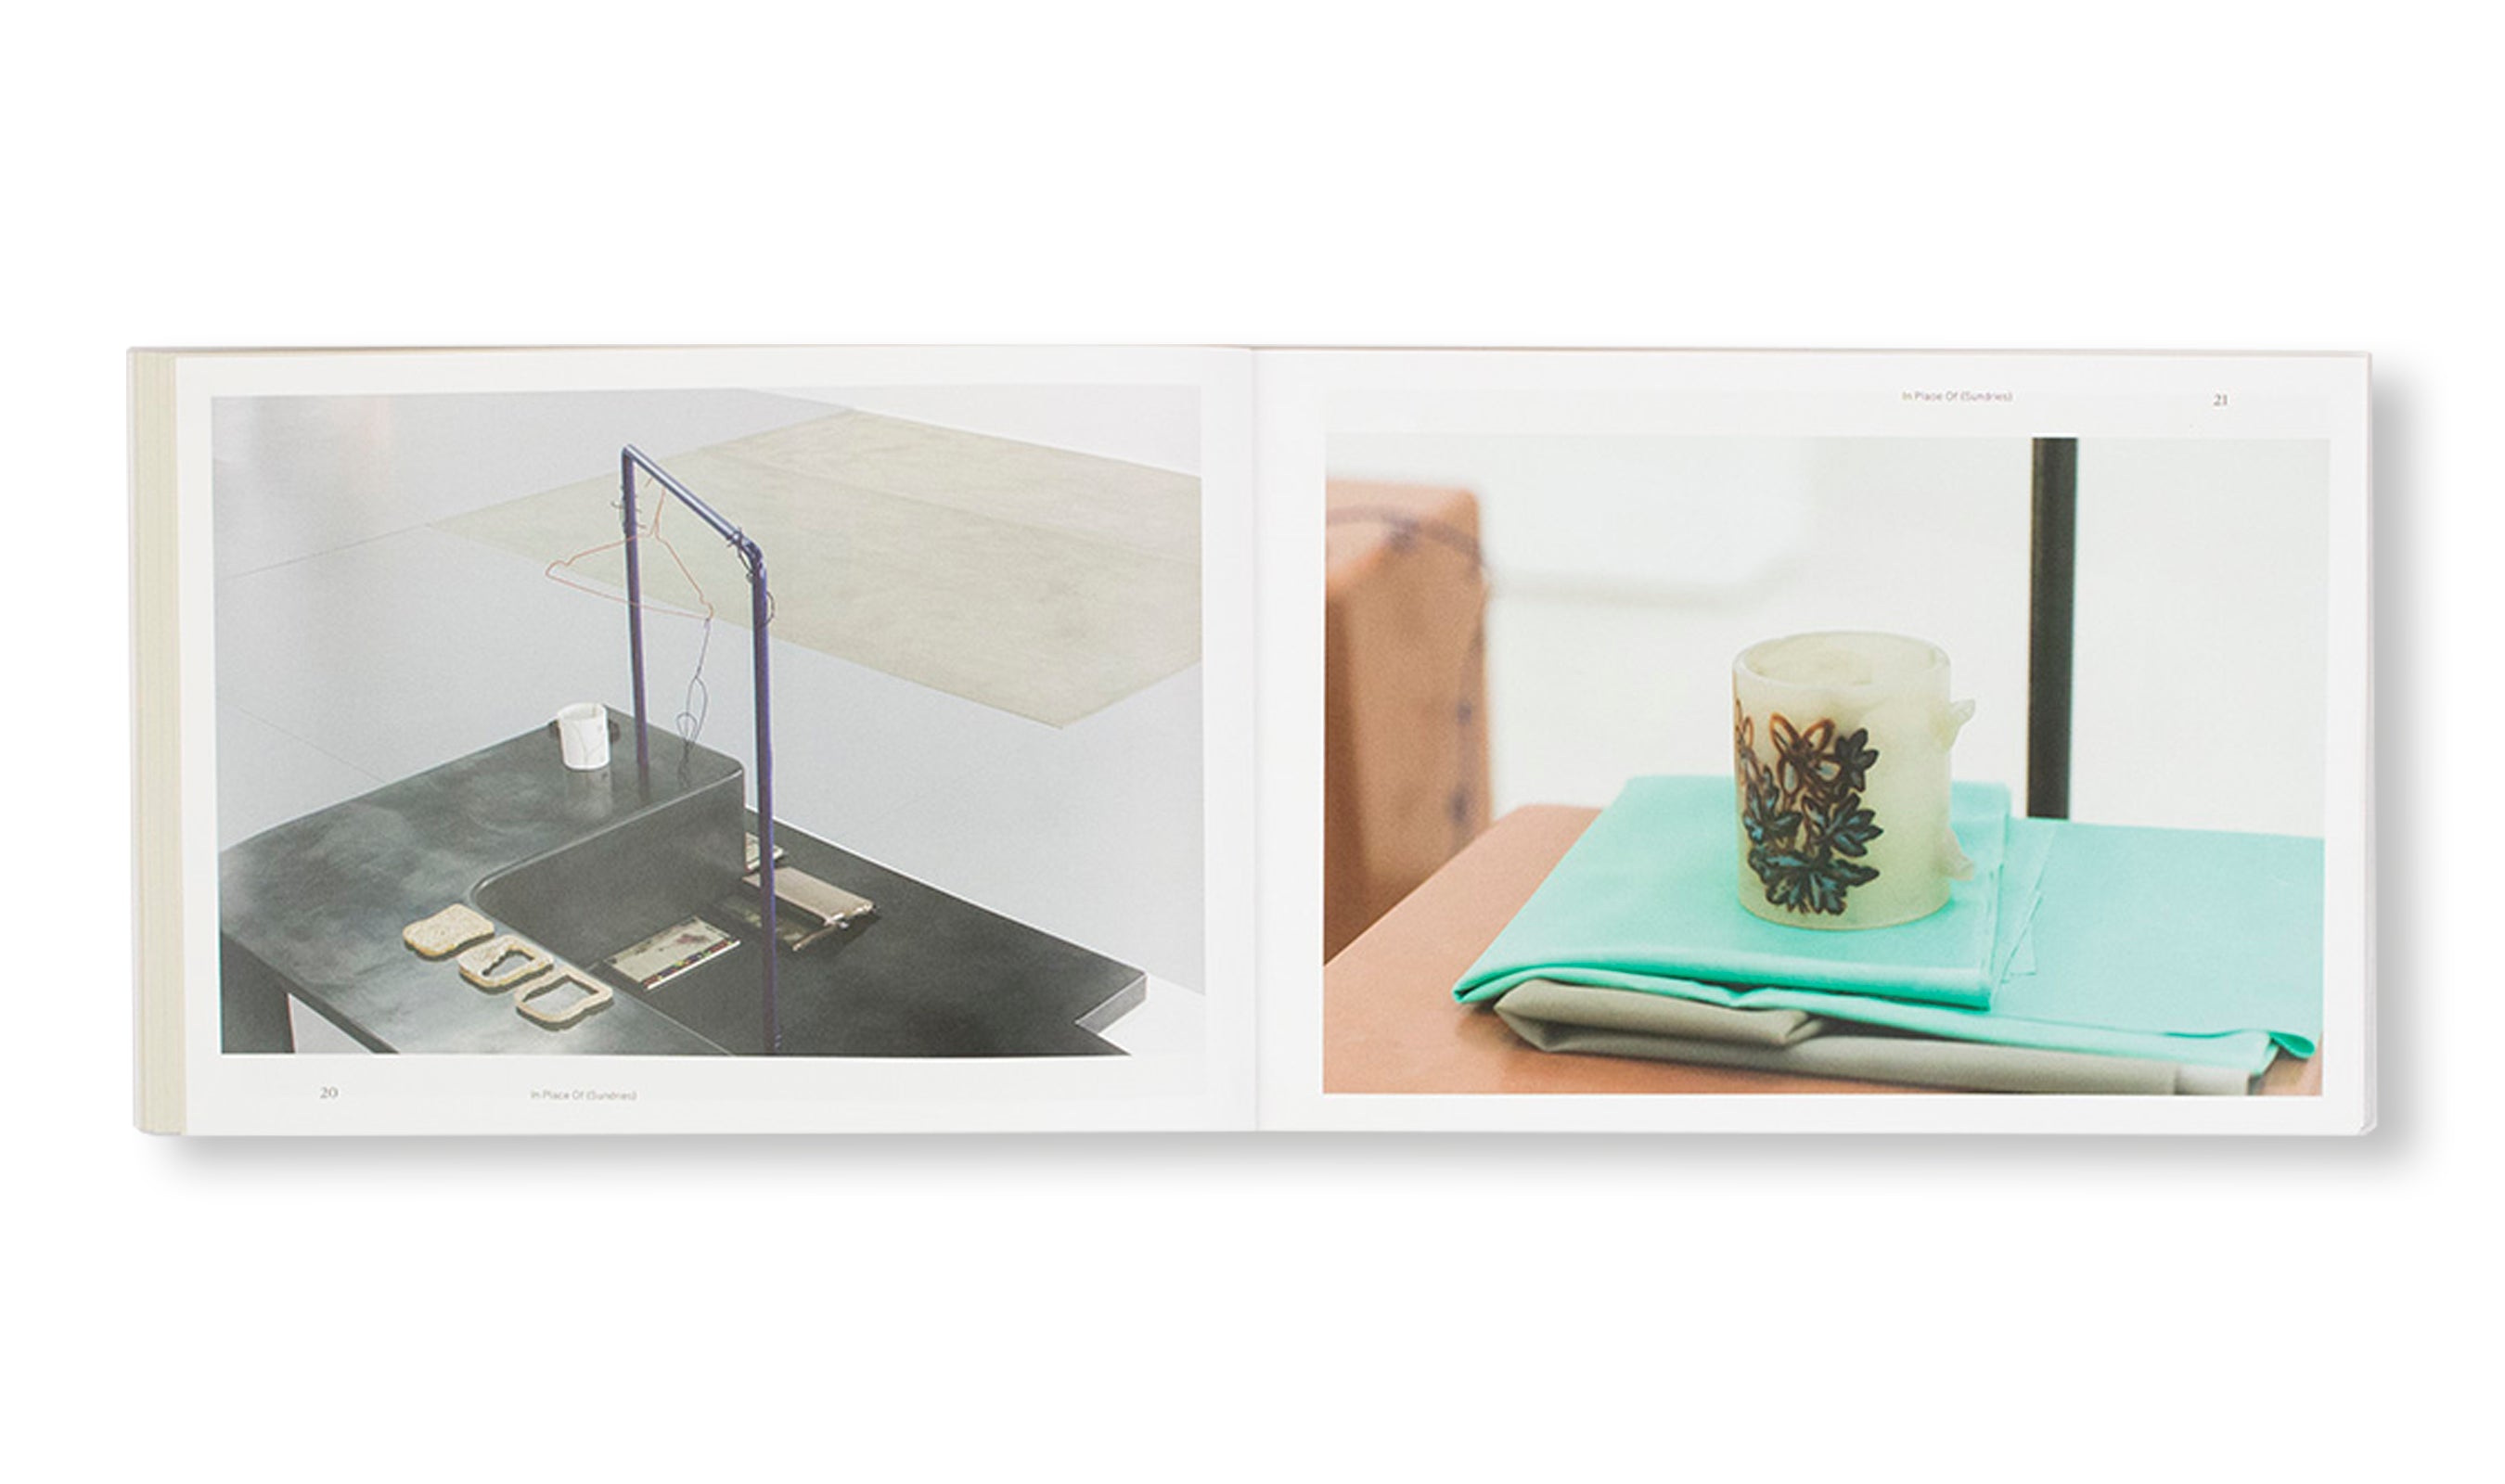 SPRING FOR A GROUND / PARTICLE OF INCH / HALTED PAVES / QUARTERS by Magali Reus